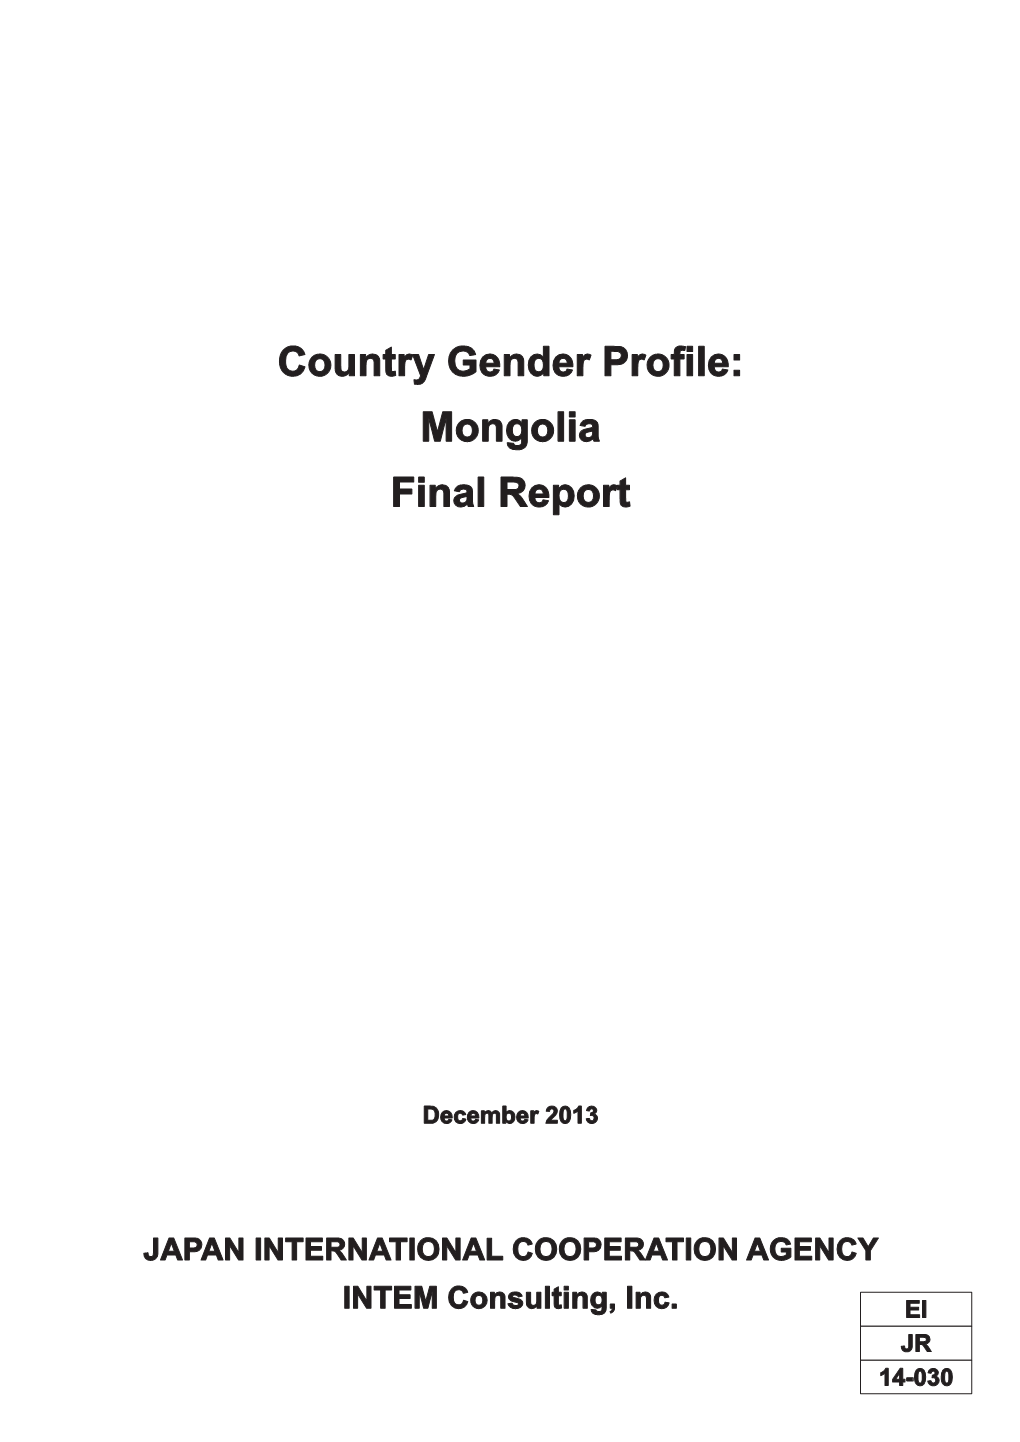 Country Gender Profile: Mongolia Final Report